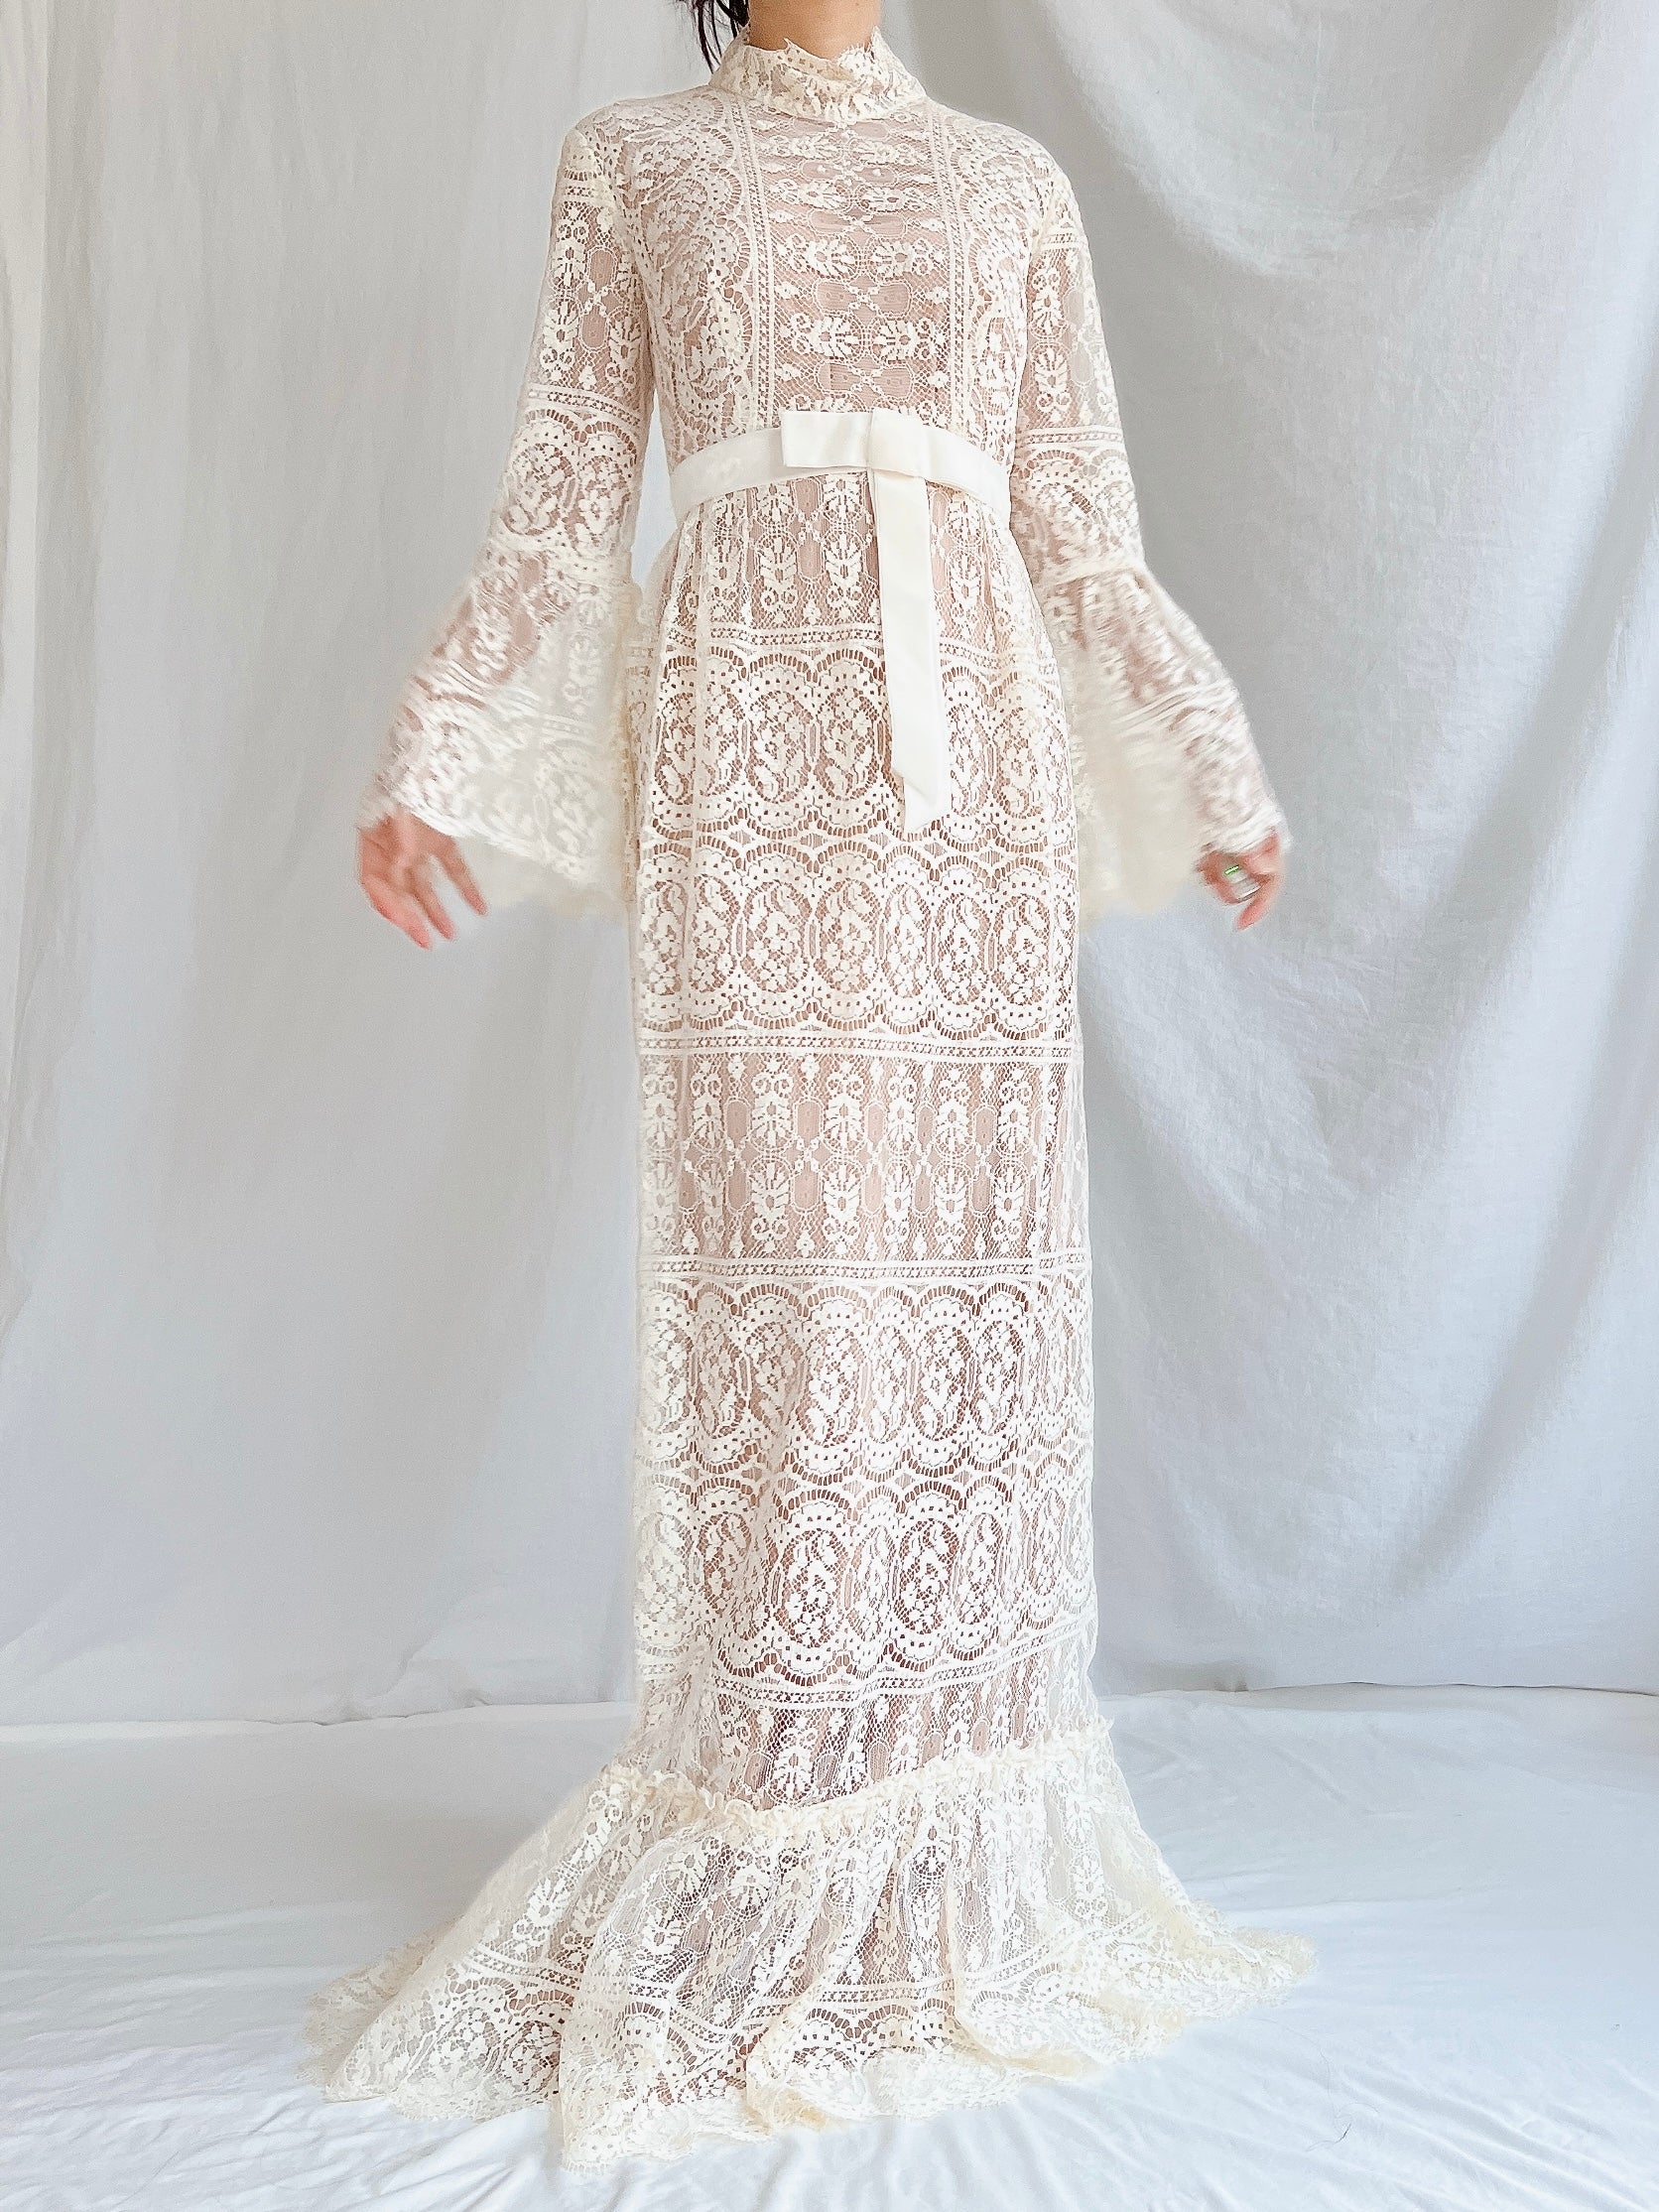 1970s Sheer Filet Lace Gown - M